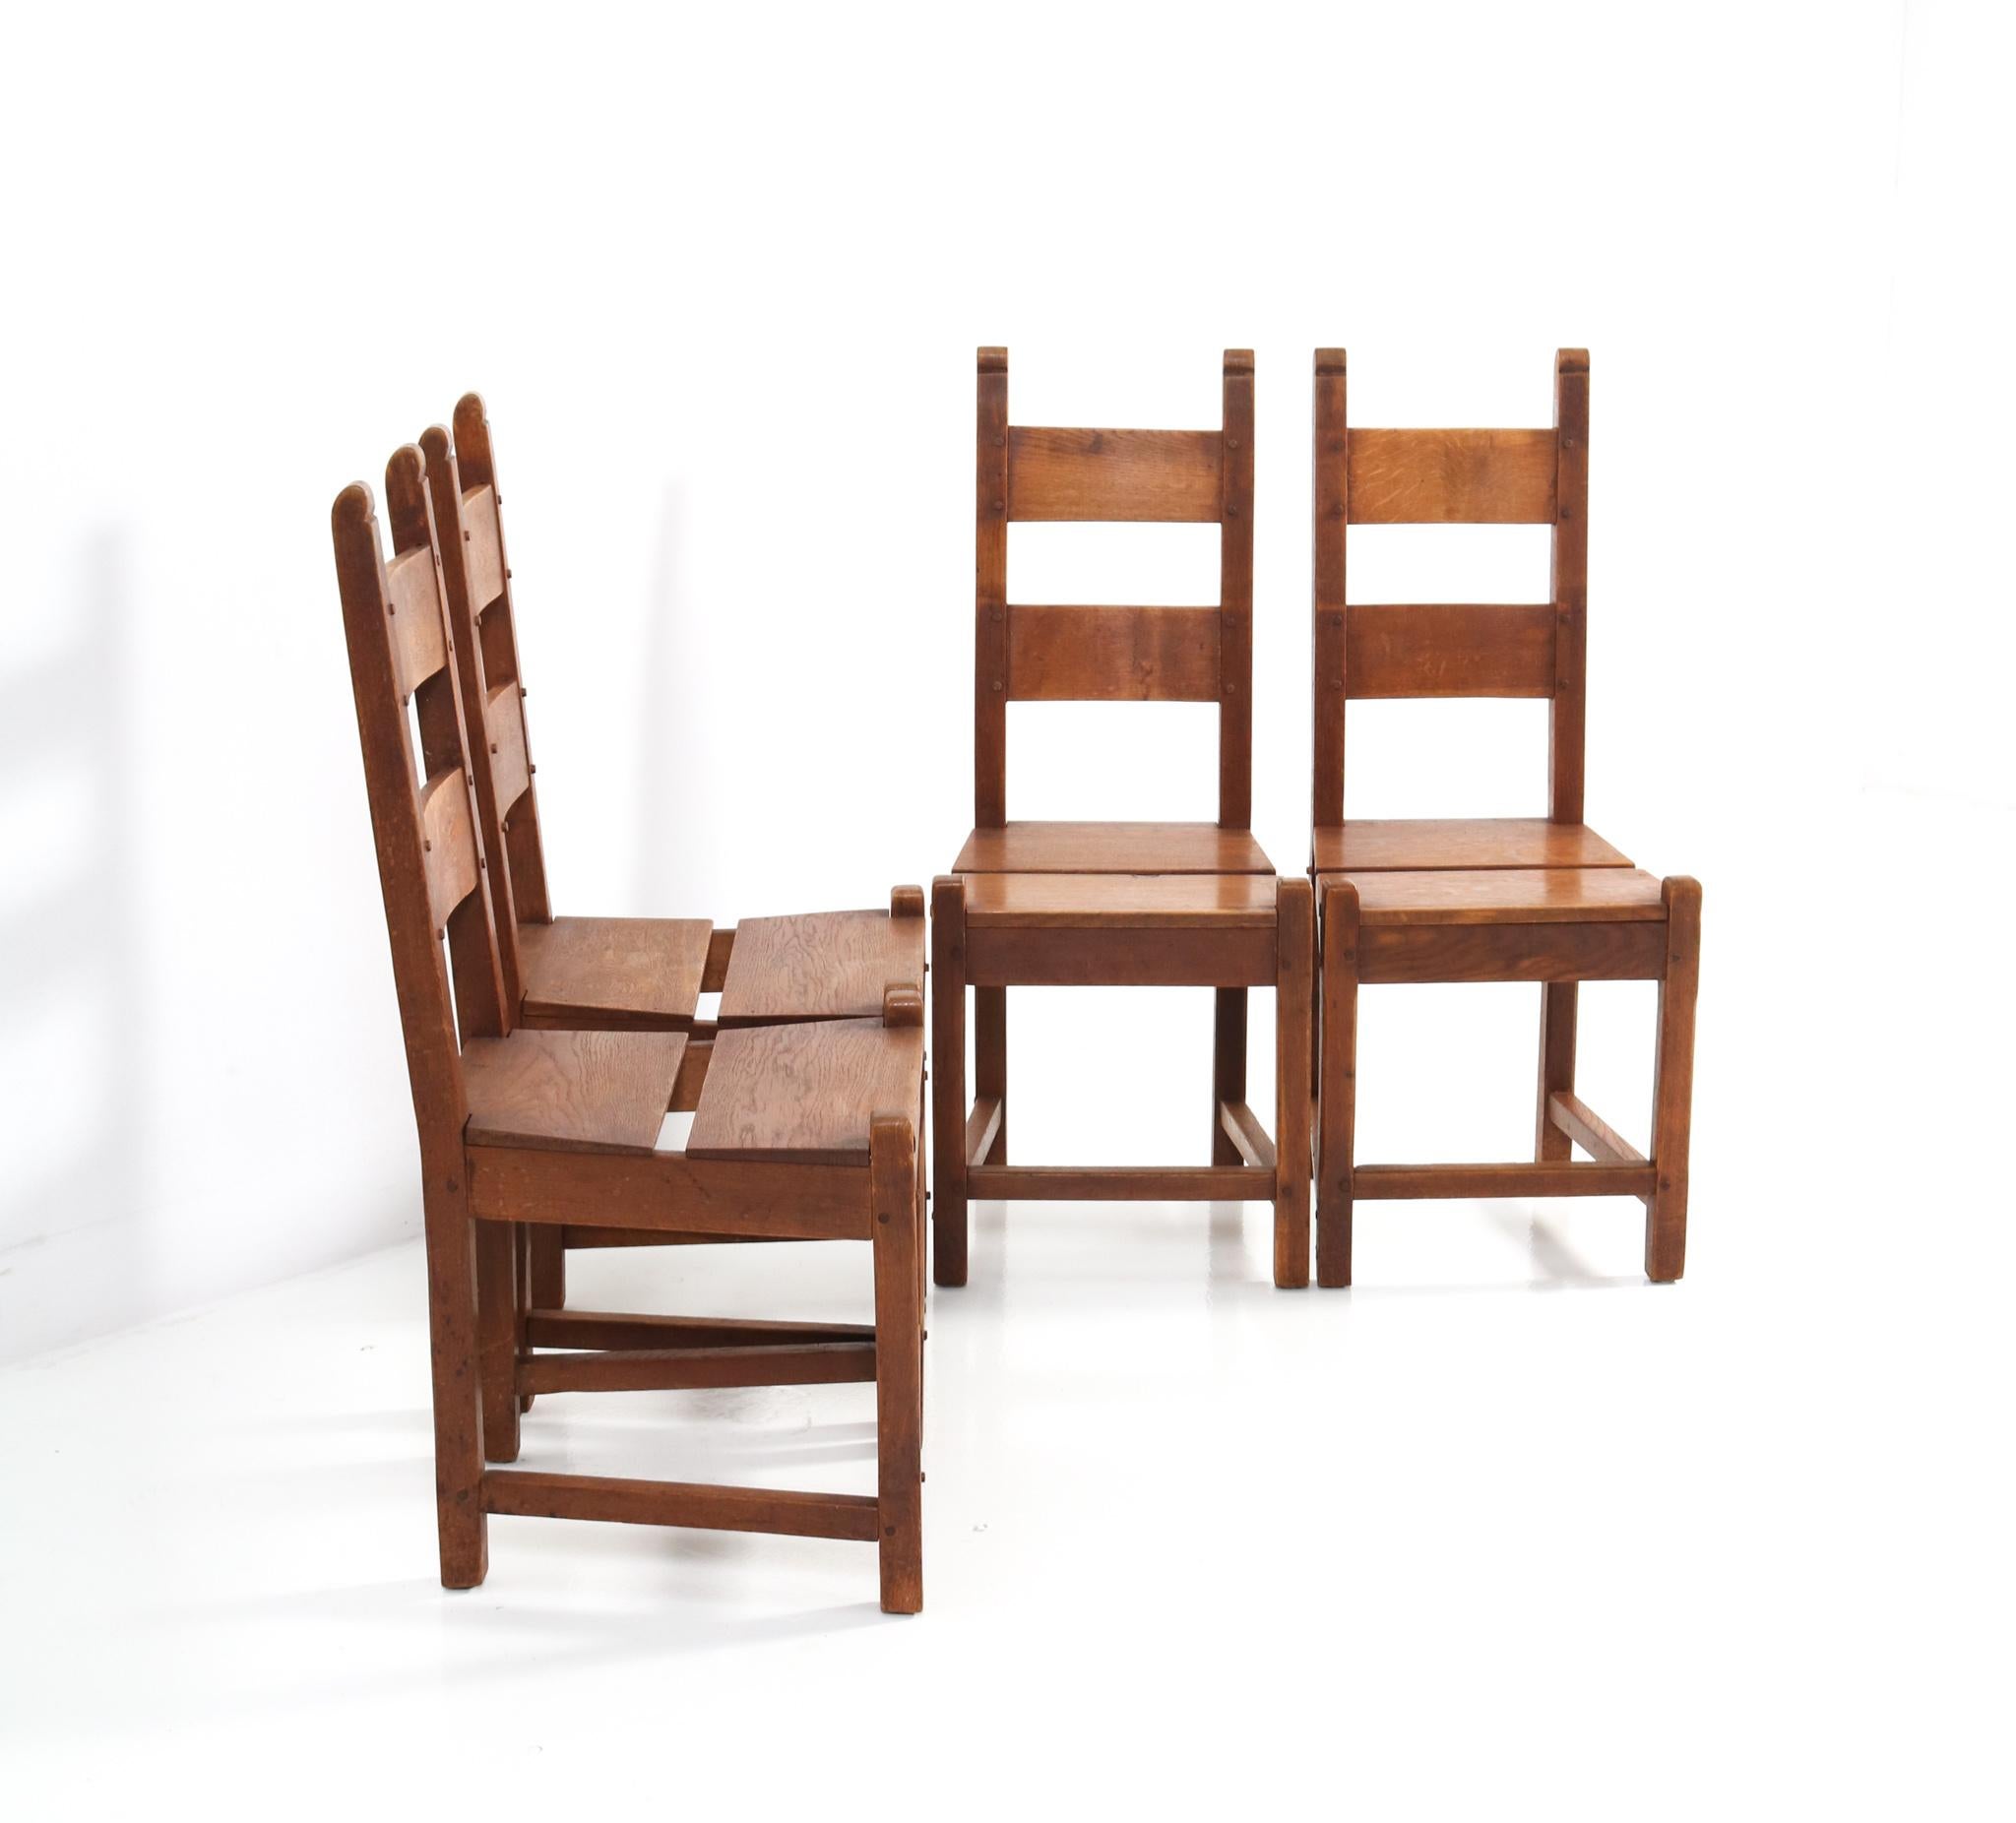 Stunning and rare Rustic Brutalist set of four dining room chairs.
Striking Dutch design from the 1940s.
Solid oak with original split seats.
In very good condition with a beautiful patina.